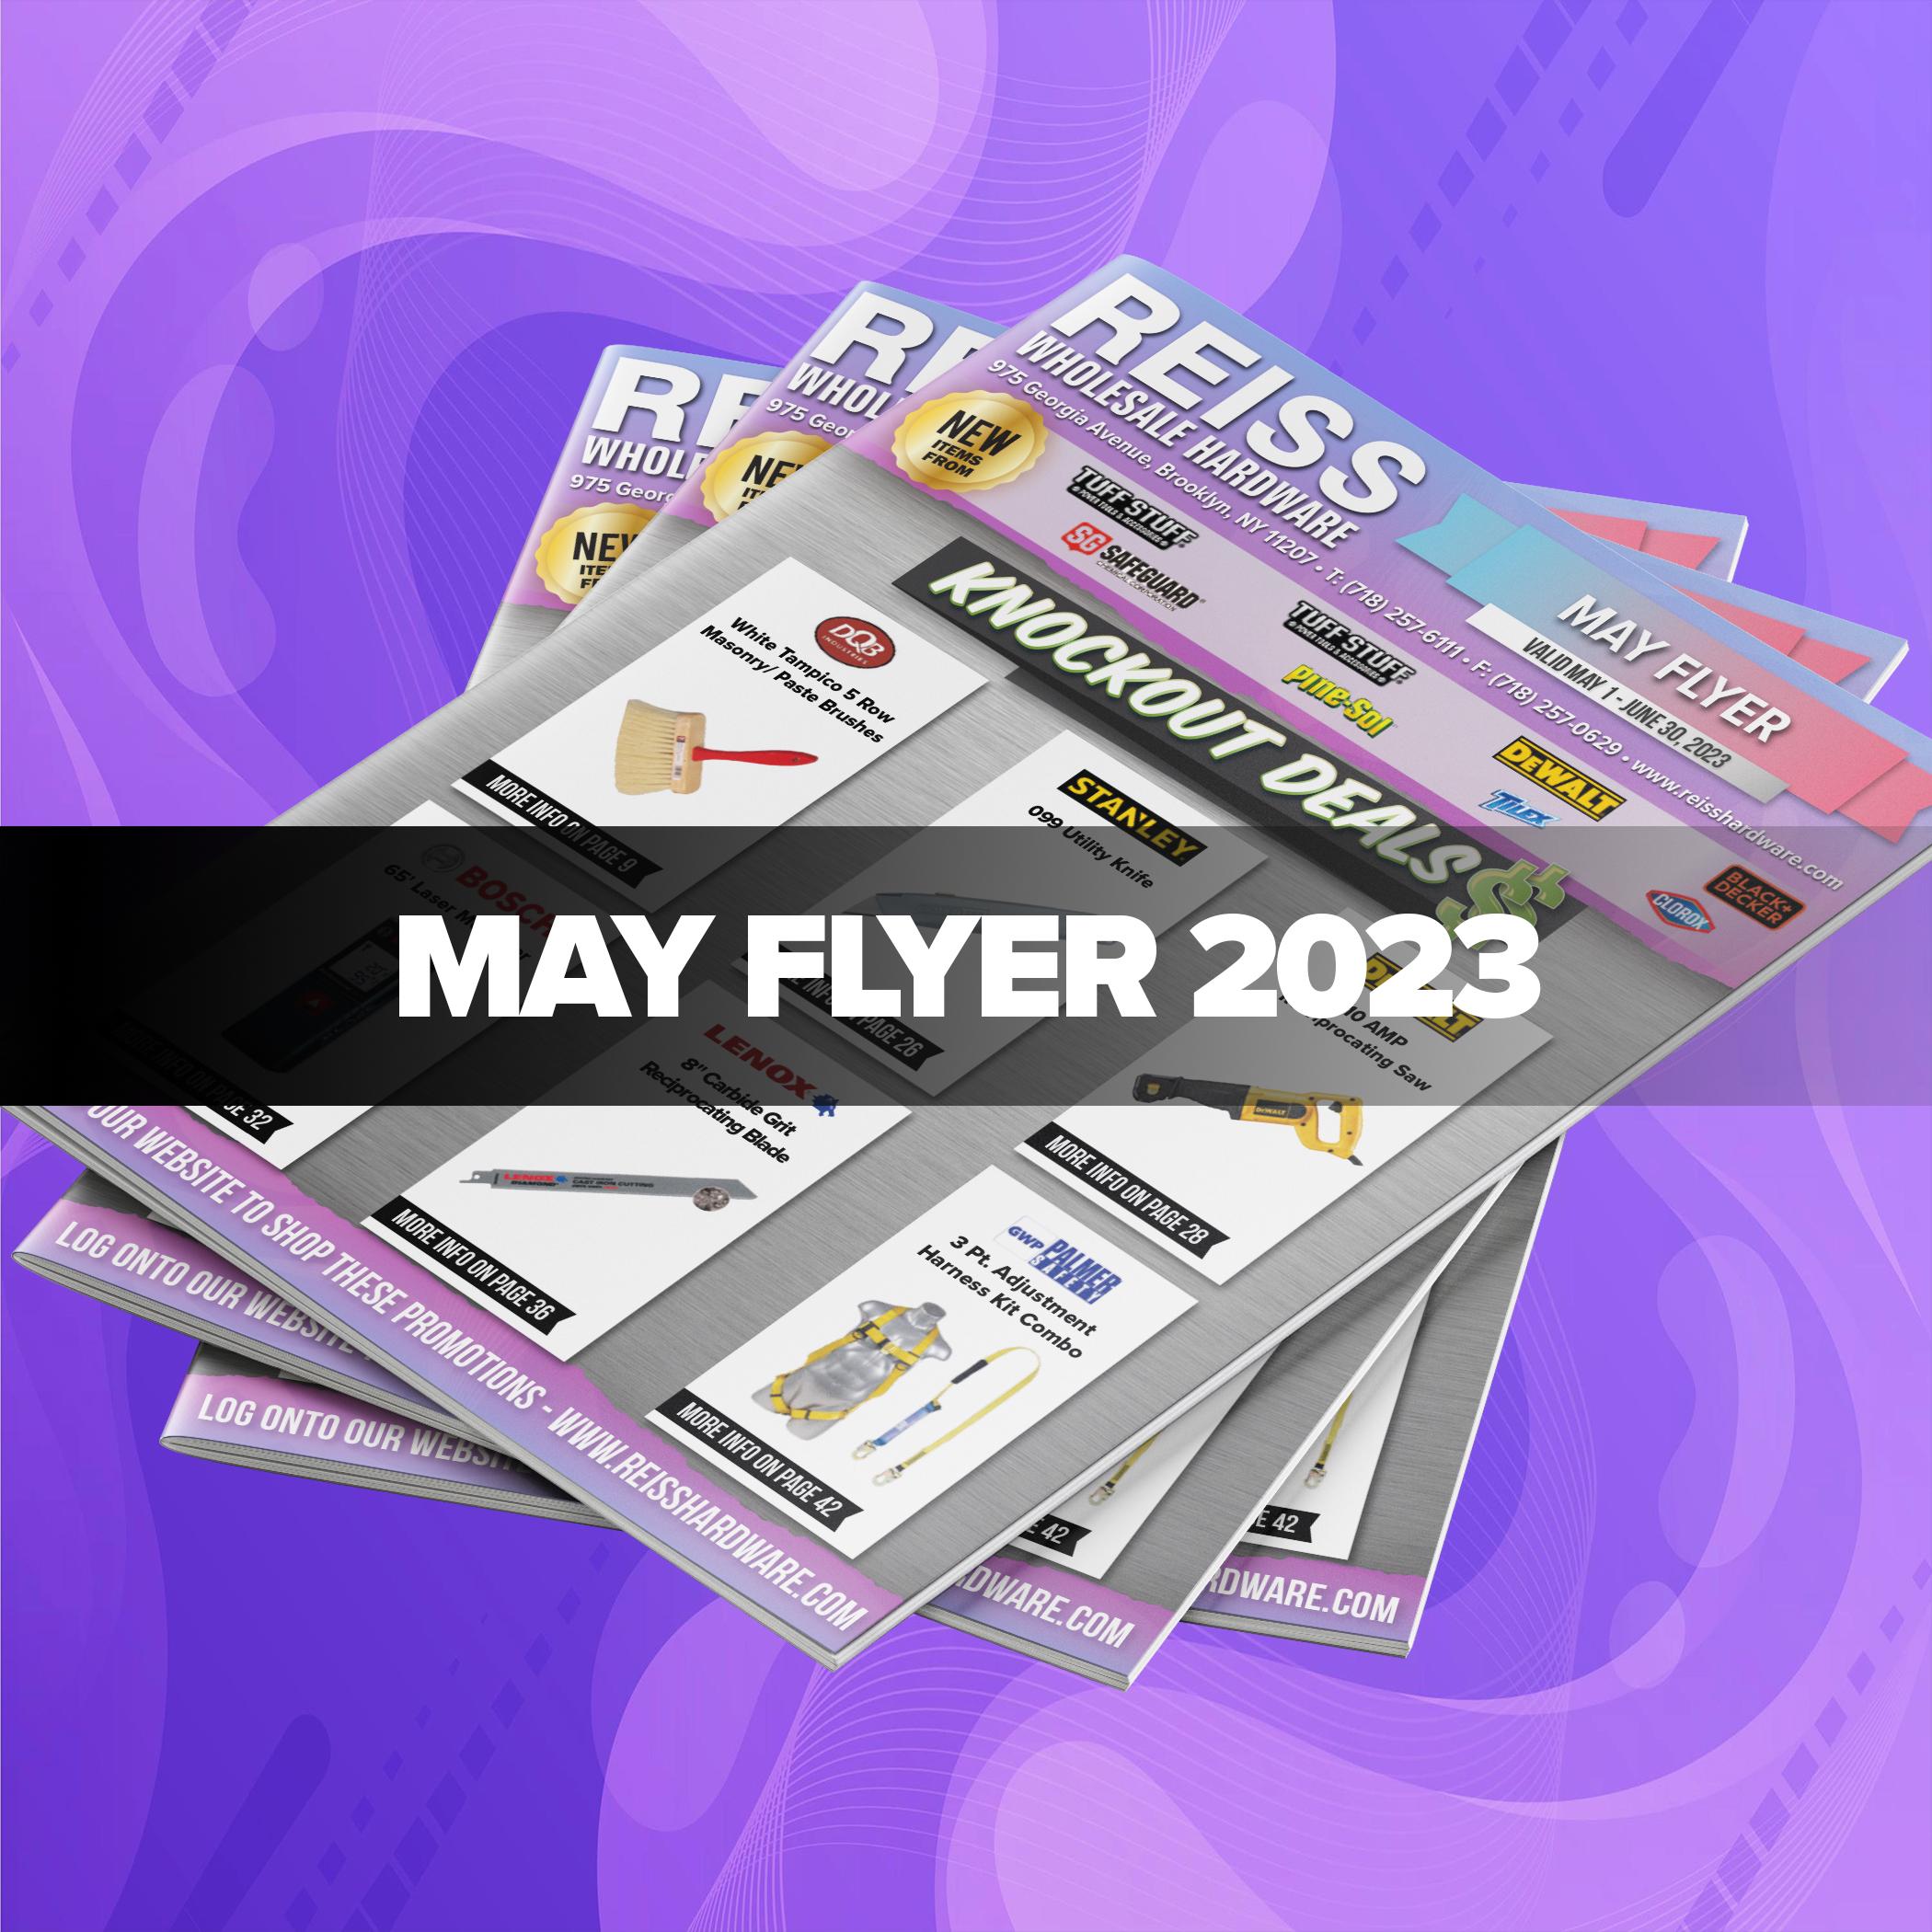 May Flyer 2023